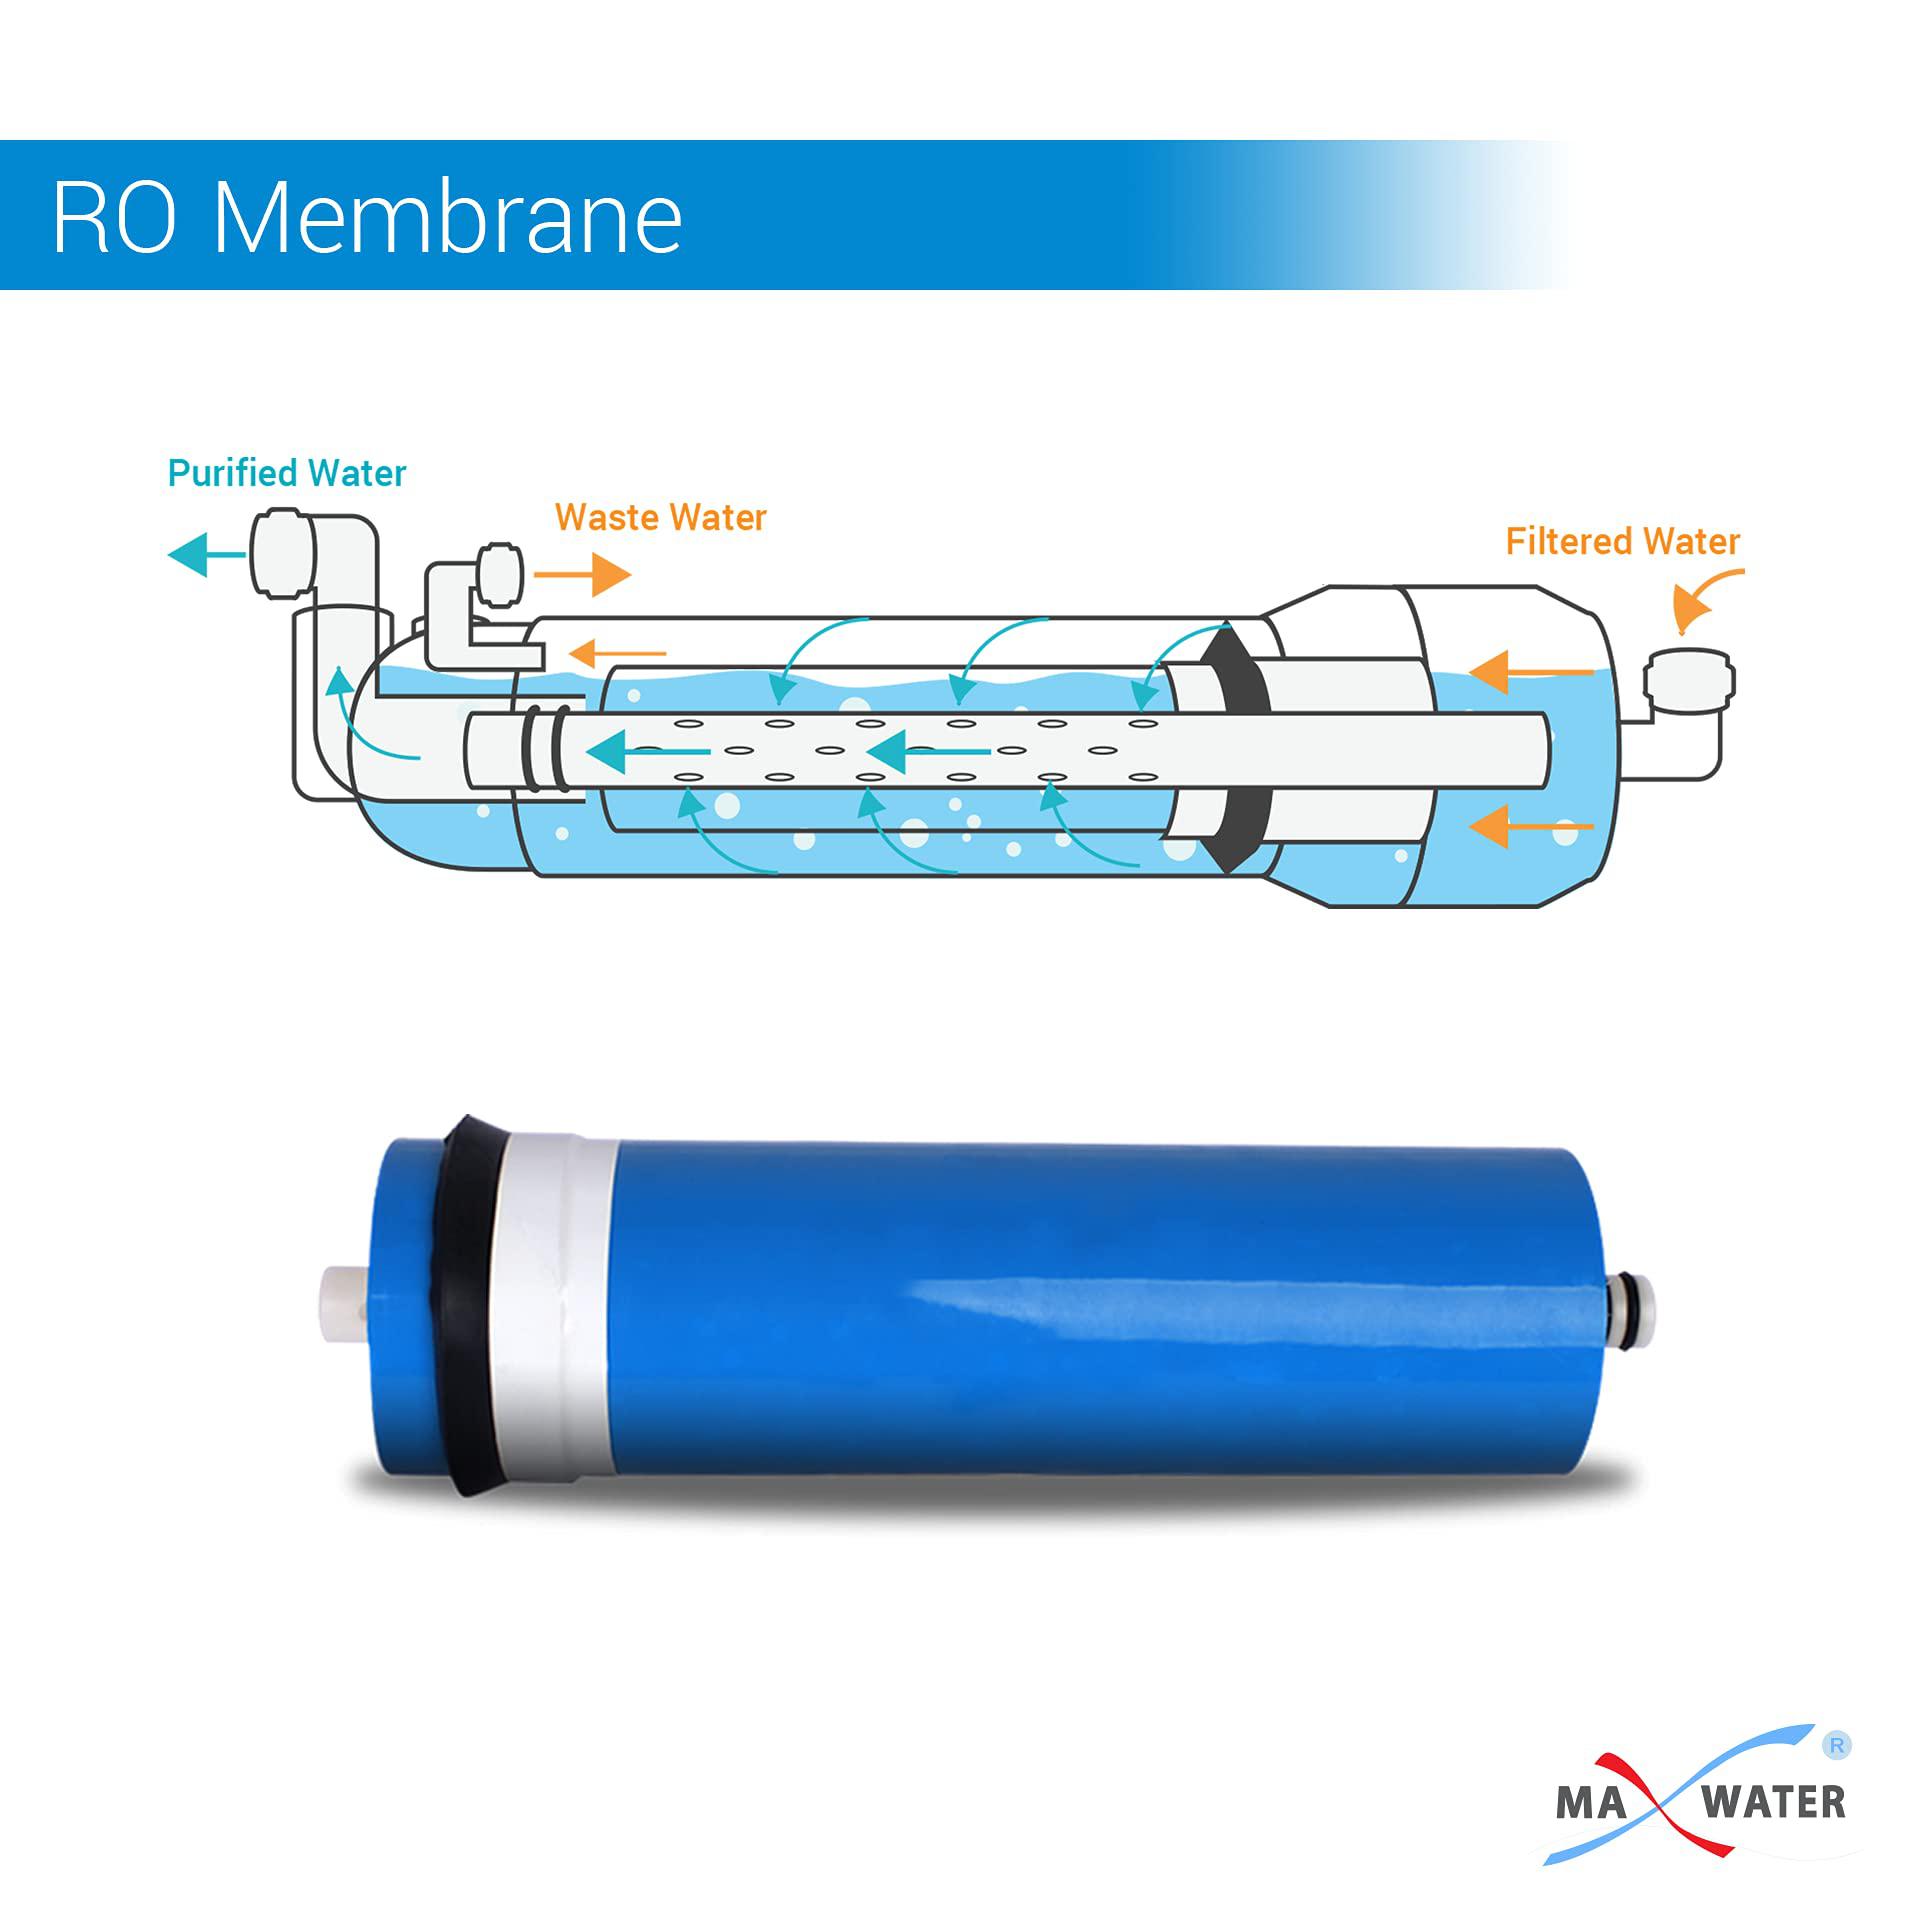 Max Water reverse osmosis commercial ro membrane 300 gpd compatible with commercial reverse osmosis systems consistent performance + le